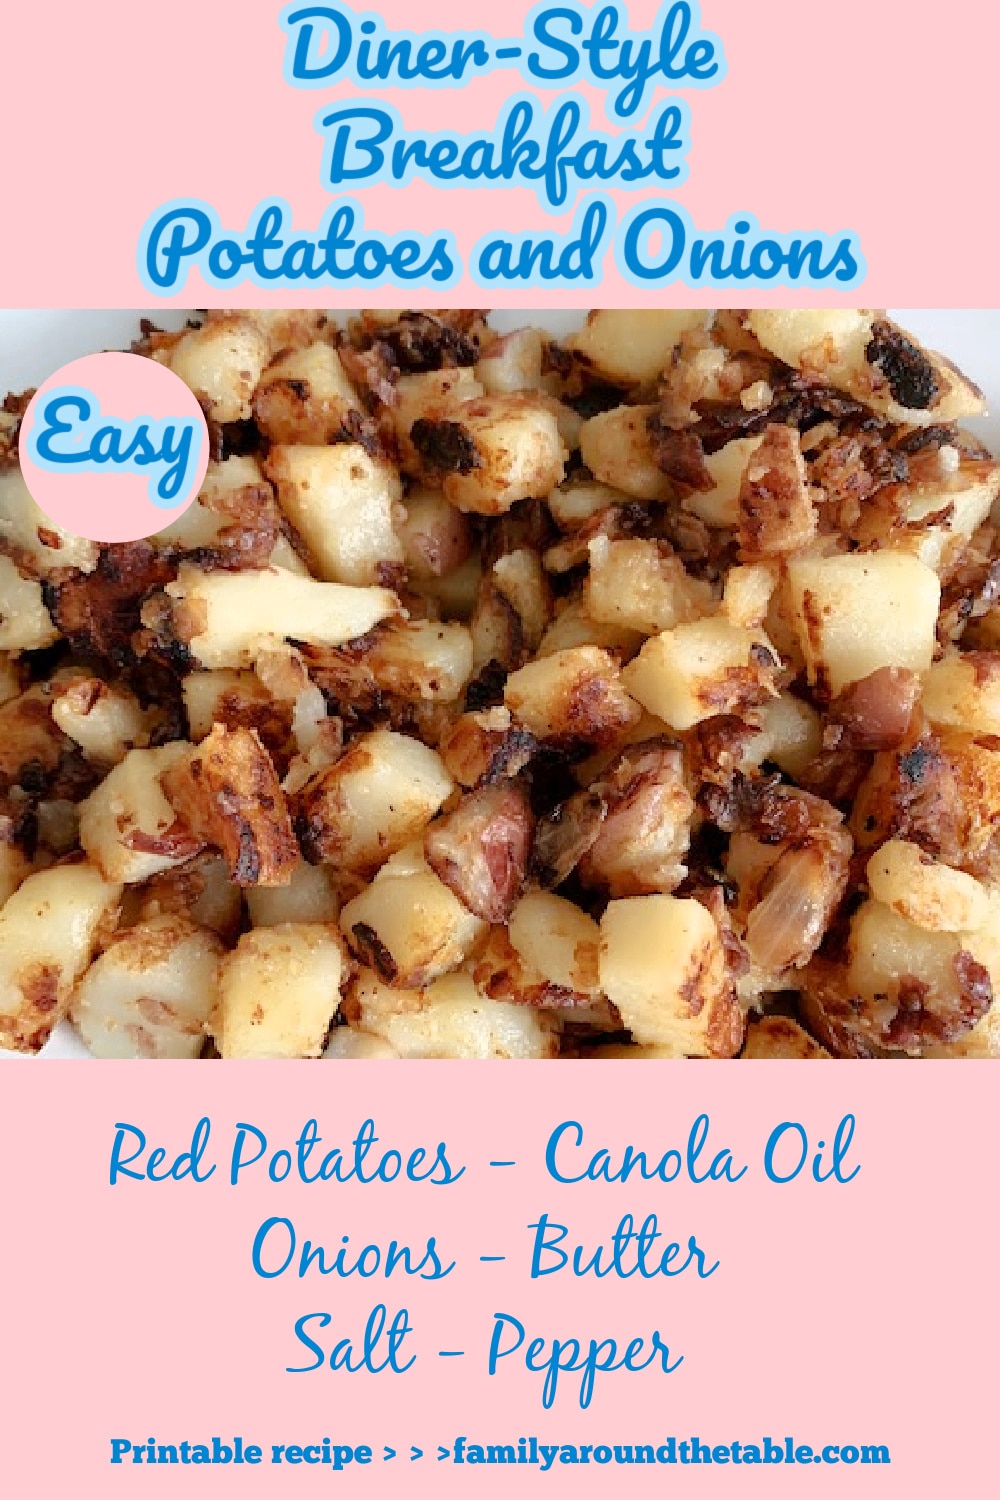 Diner style breakfast potatoes and onions Pinterest image.